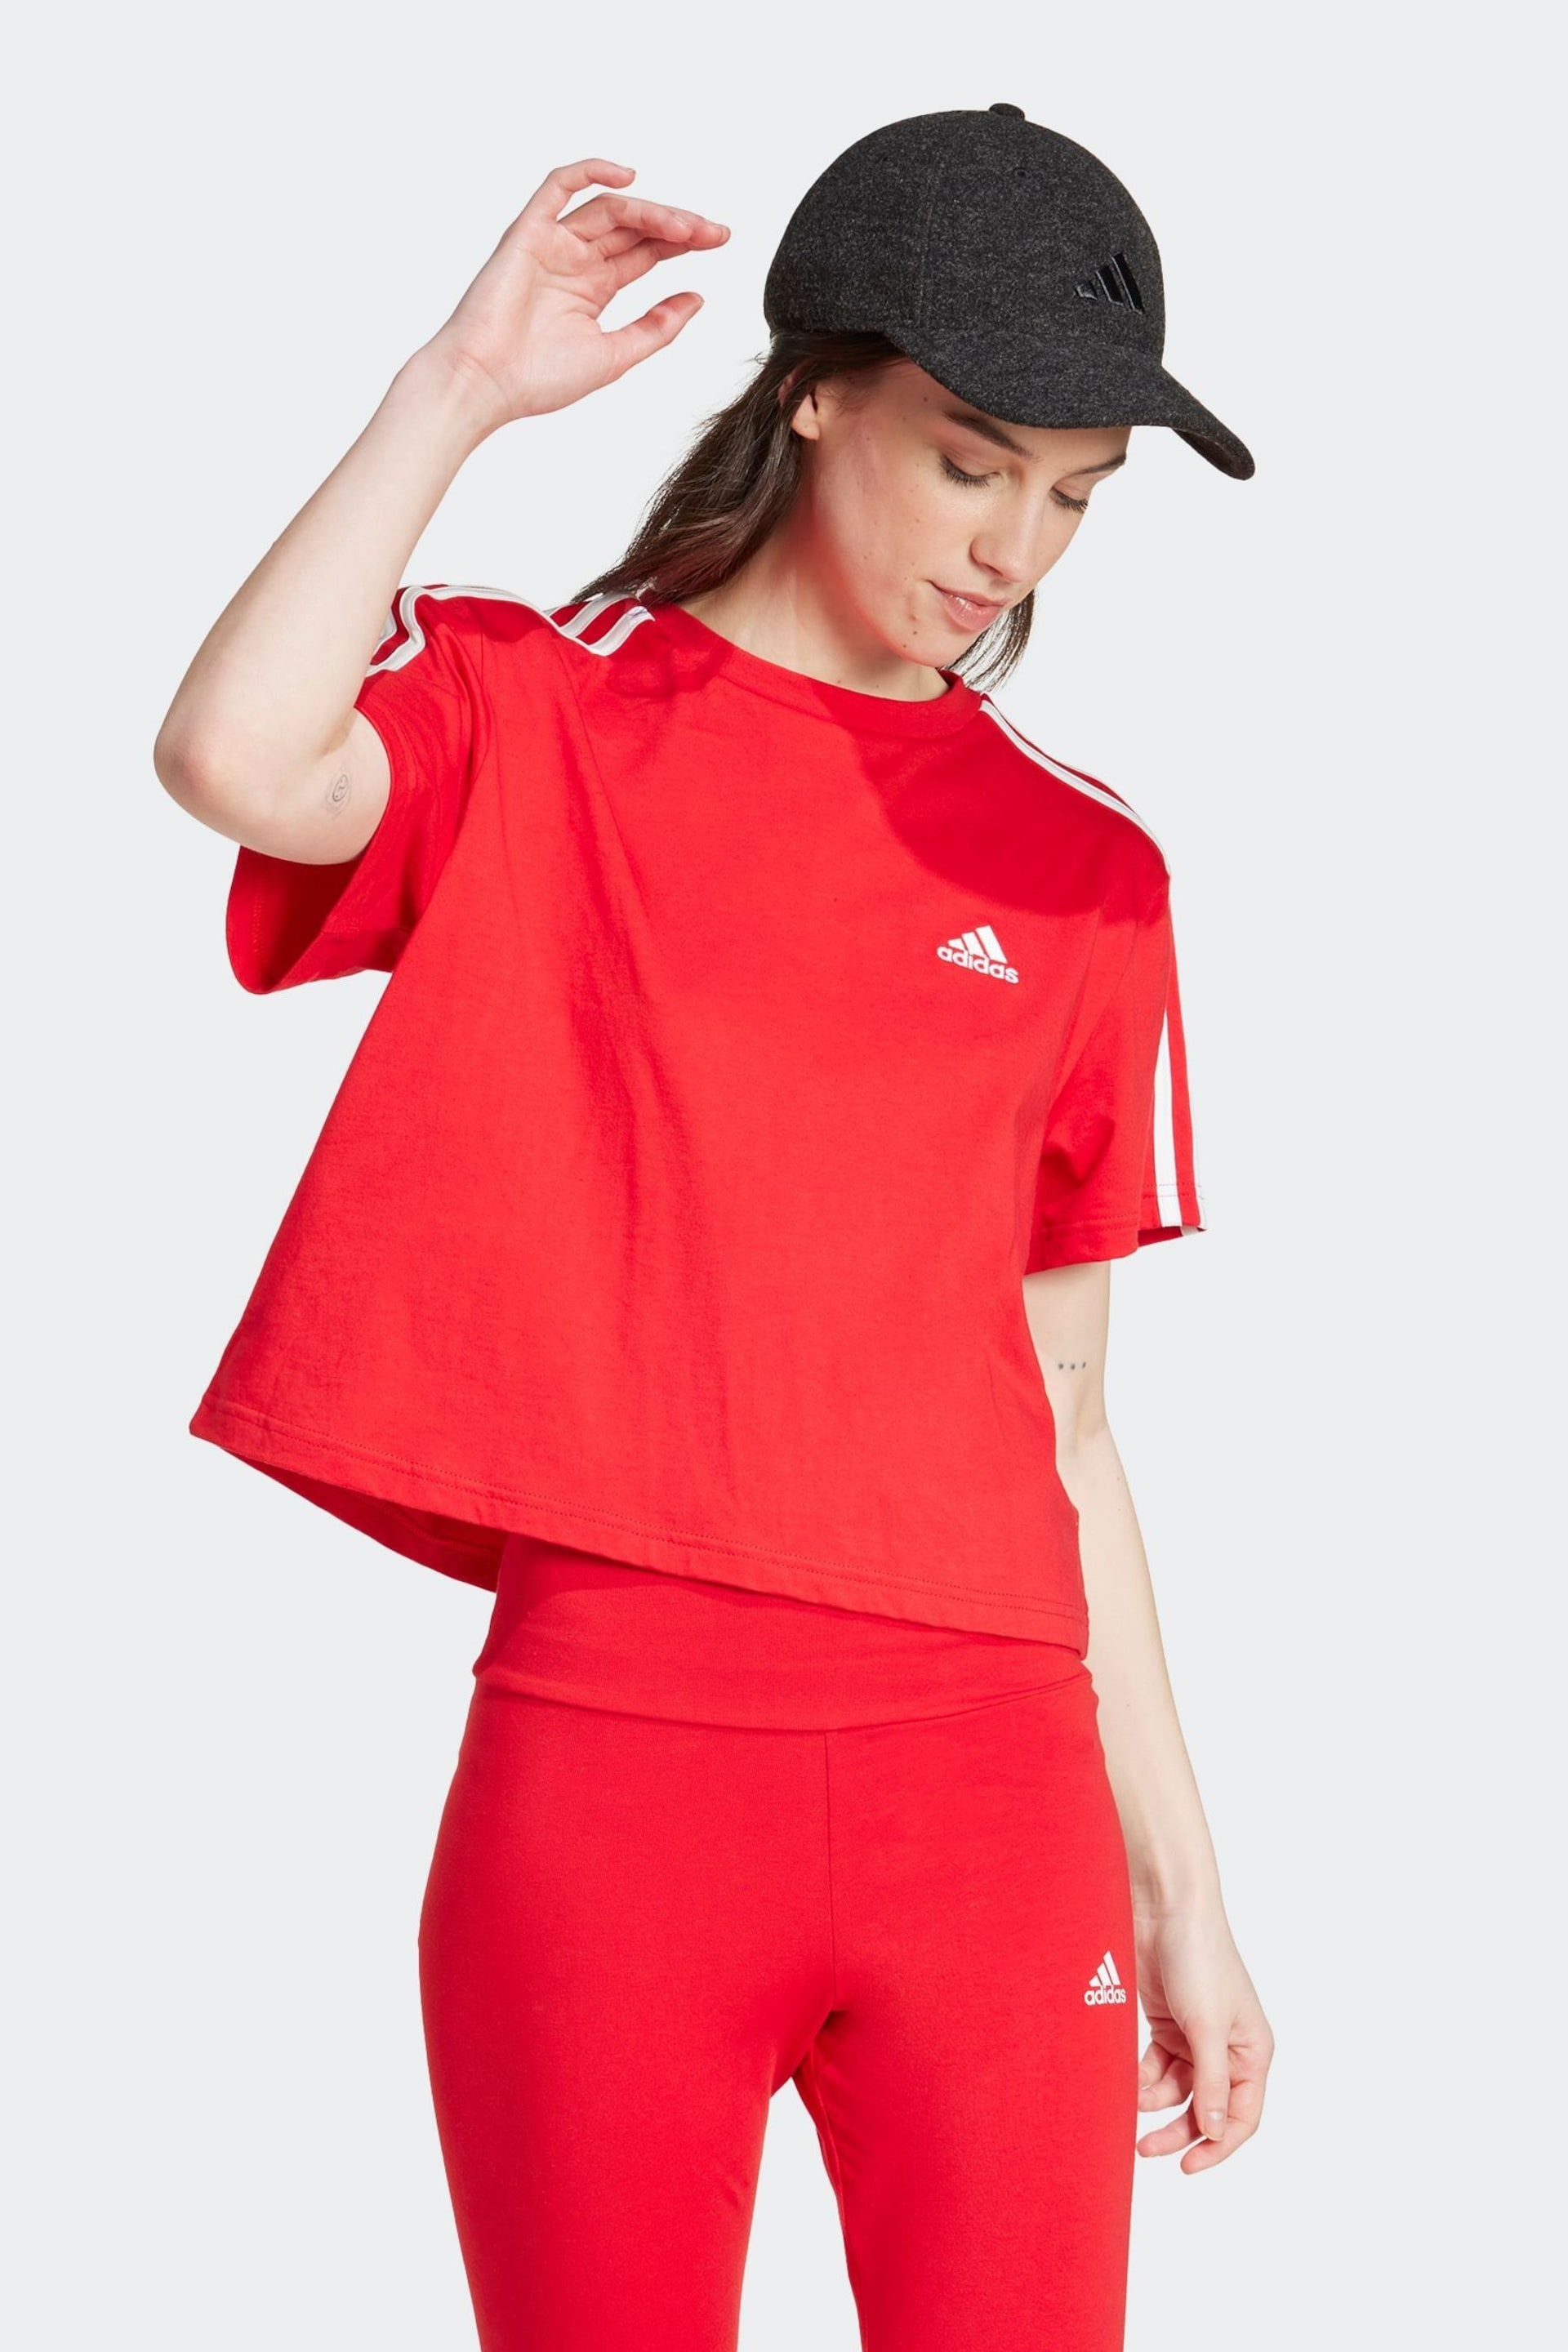 adidas Red Sportswear Essentials 3-Stripes Single Jersey Top - Image 3 of 7